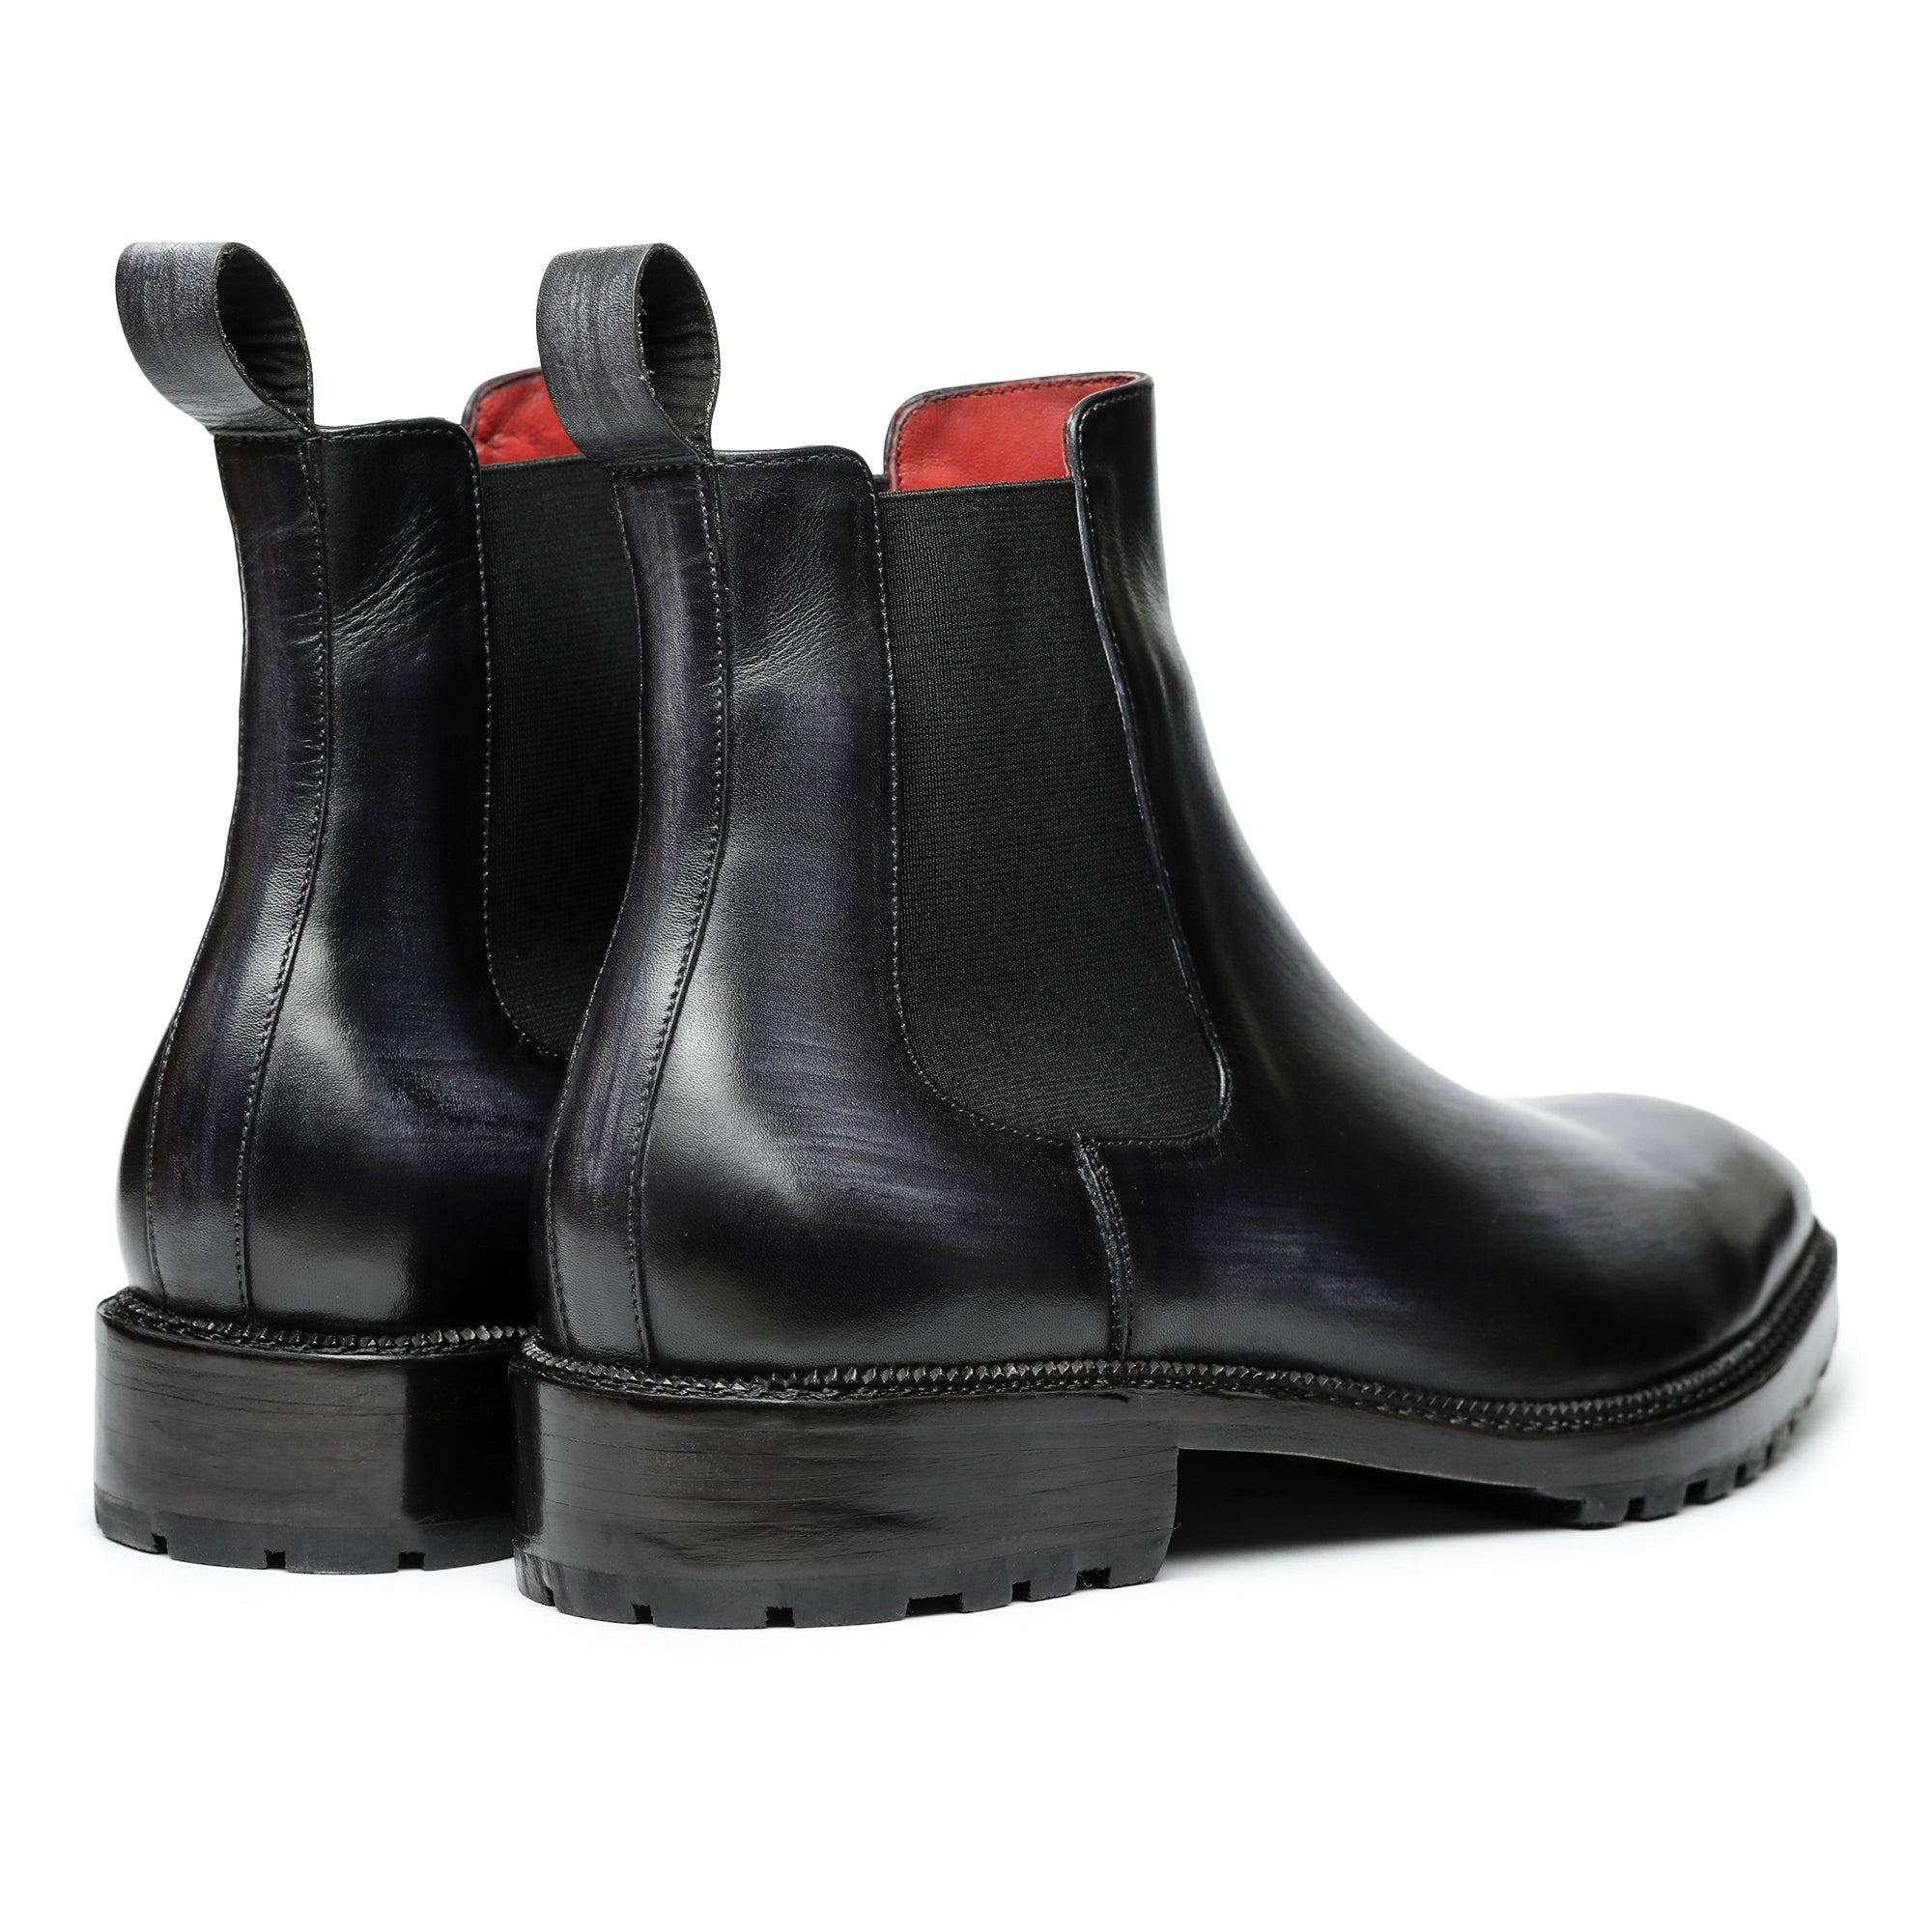 Men's High Quality Red Bottom Chelsea Boots